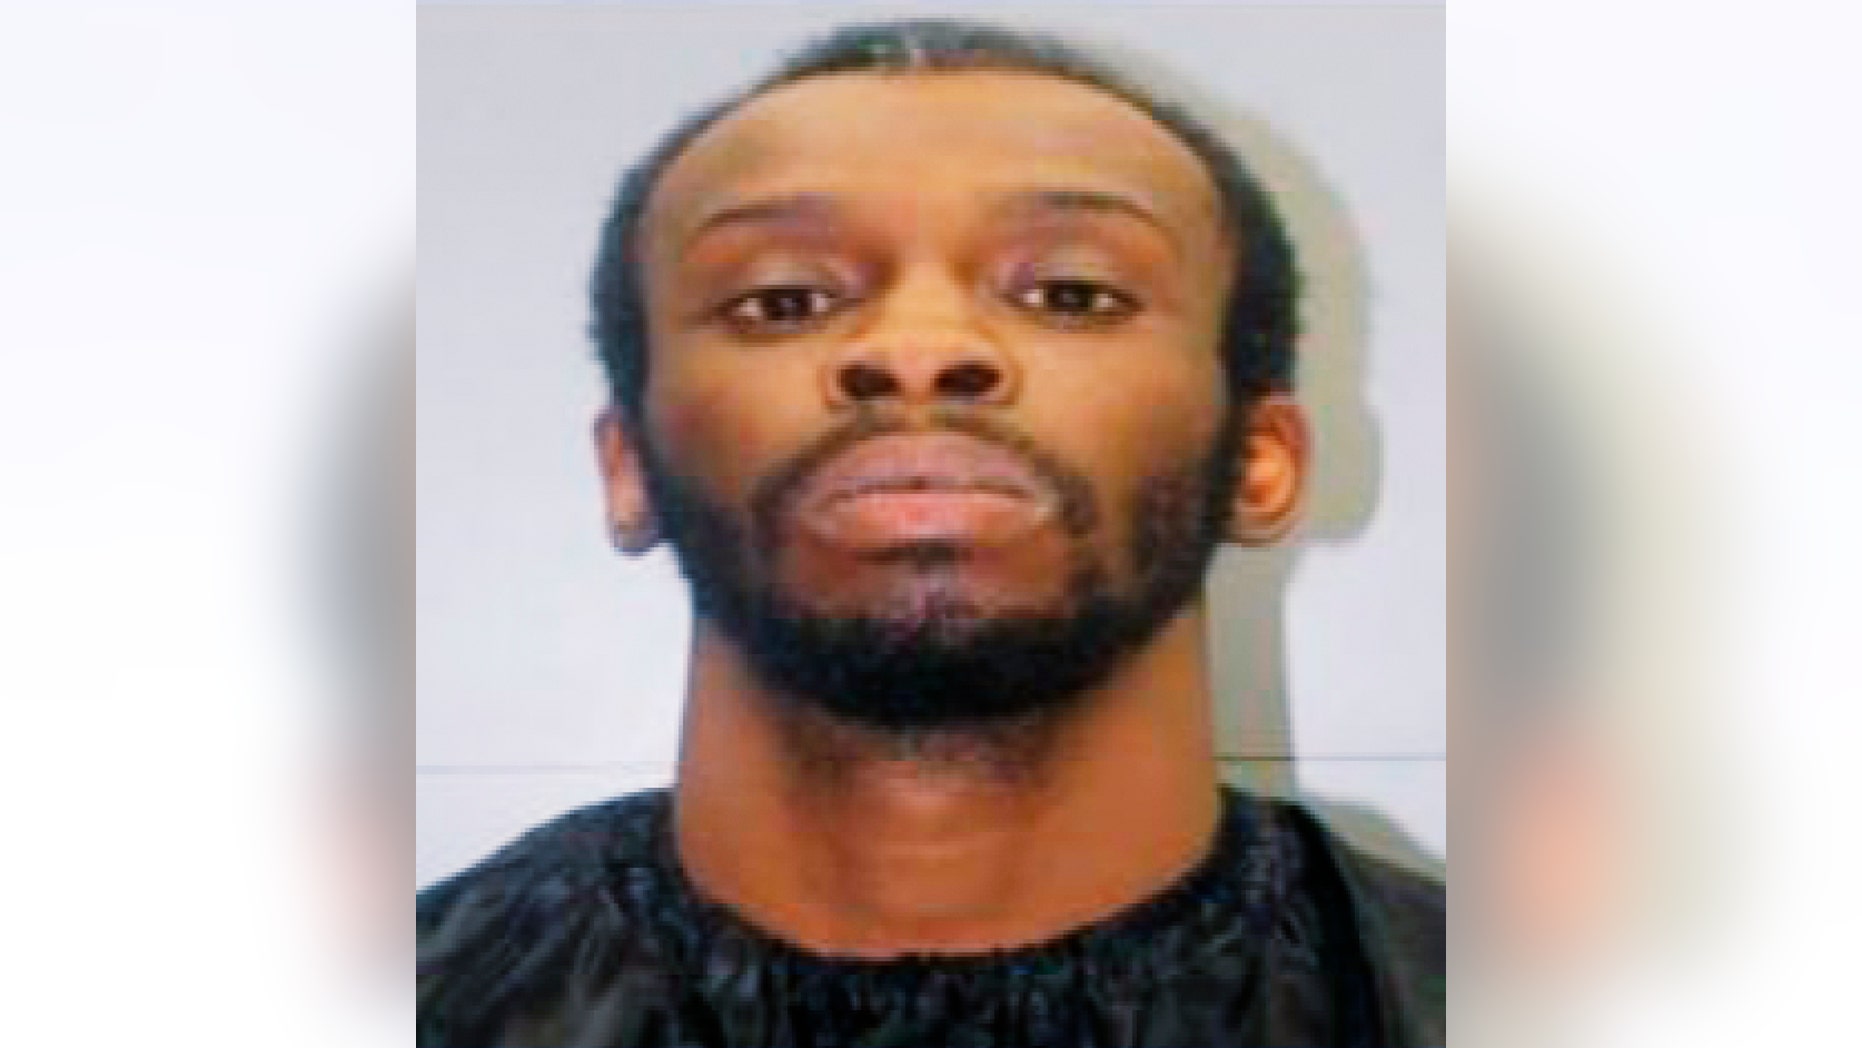 This undated photo provided by the Columbia Police Service shows Nathaniel David Rowland. Police in South Carolina said they arrested a suspect in connection with the death of a student. Columbia Police Chief Skip Holbrook told a news conference that Rowland, 24, was arrested early Saturday, March 30, 2019, and blood was found in his car. (Columbia Police Department via AP)